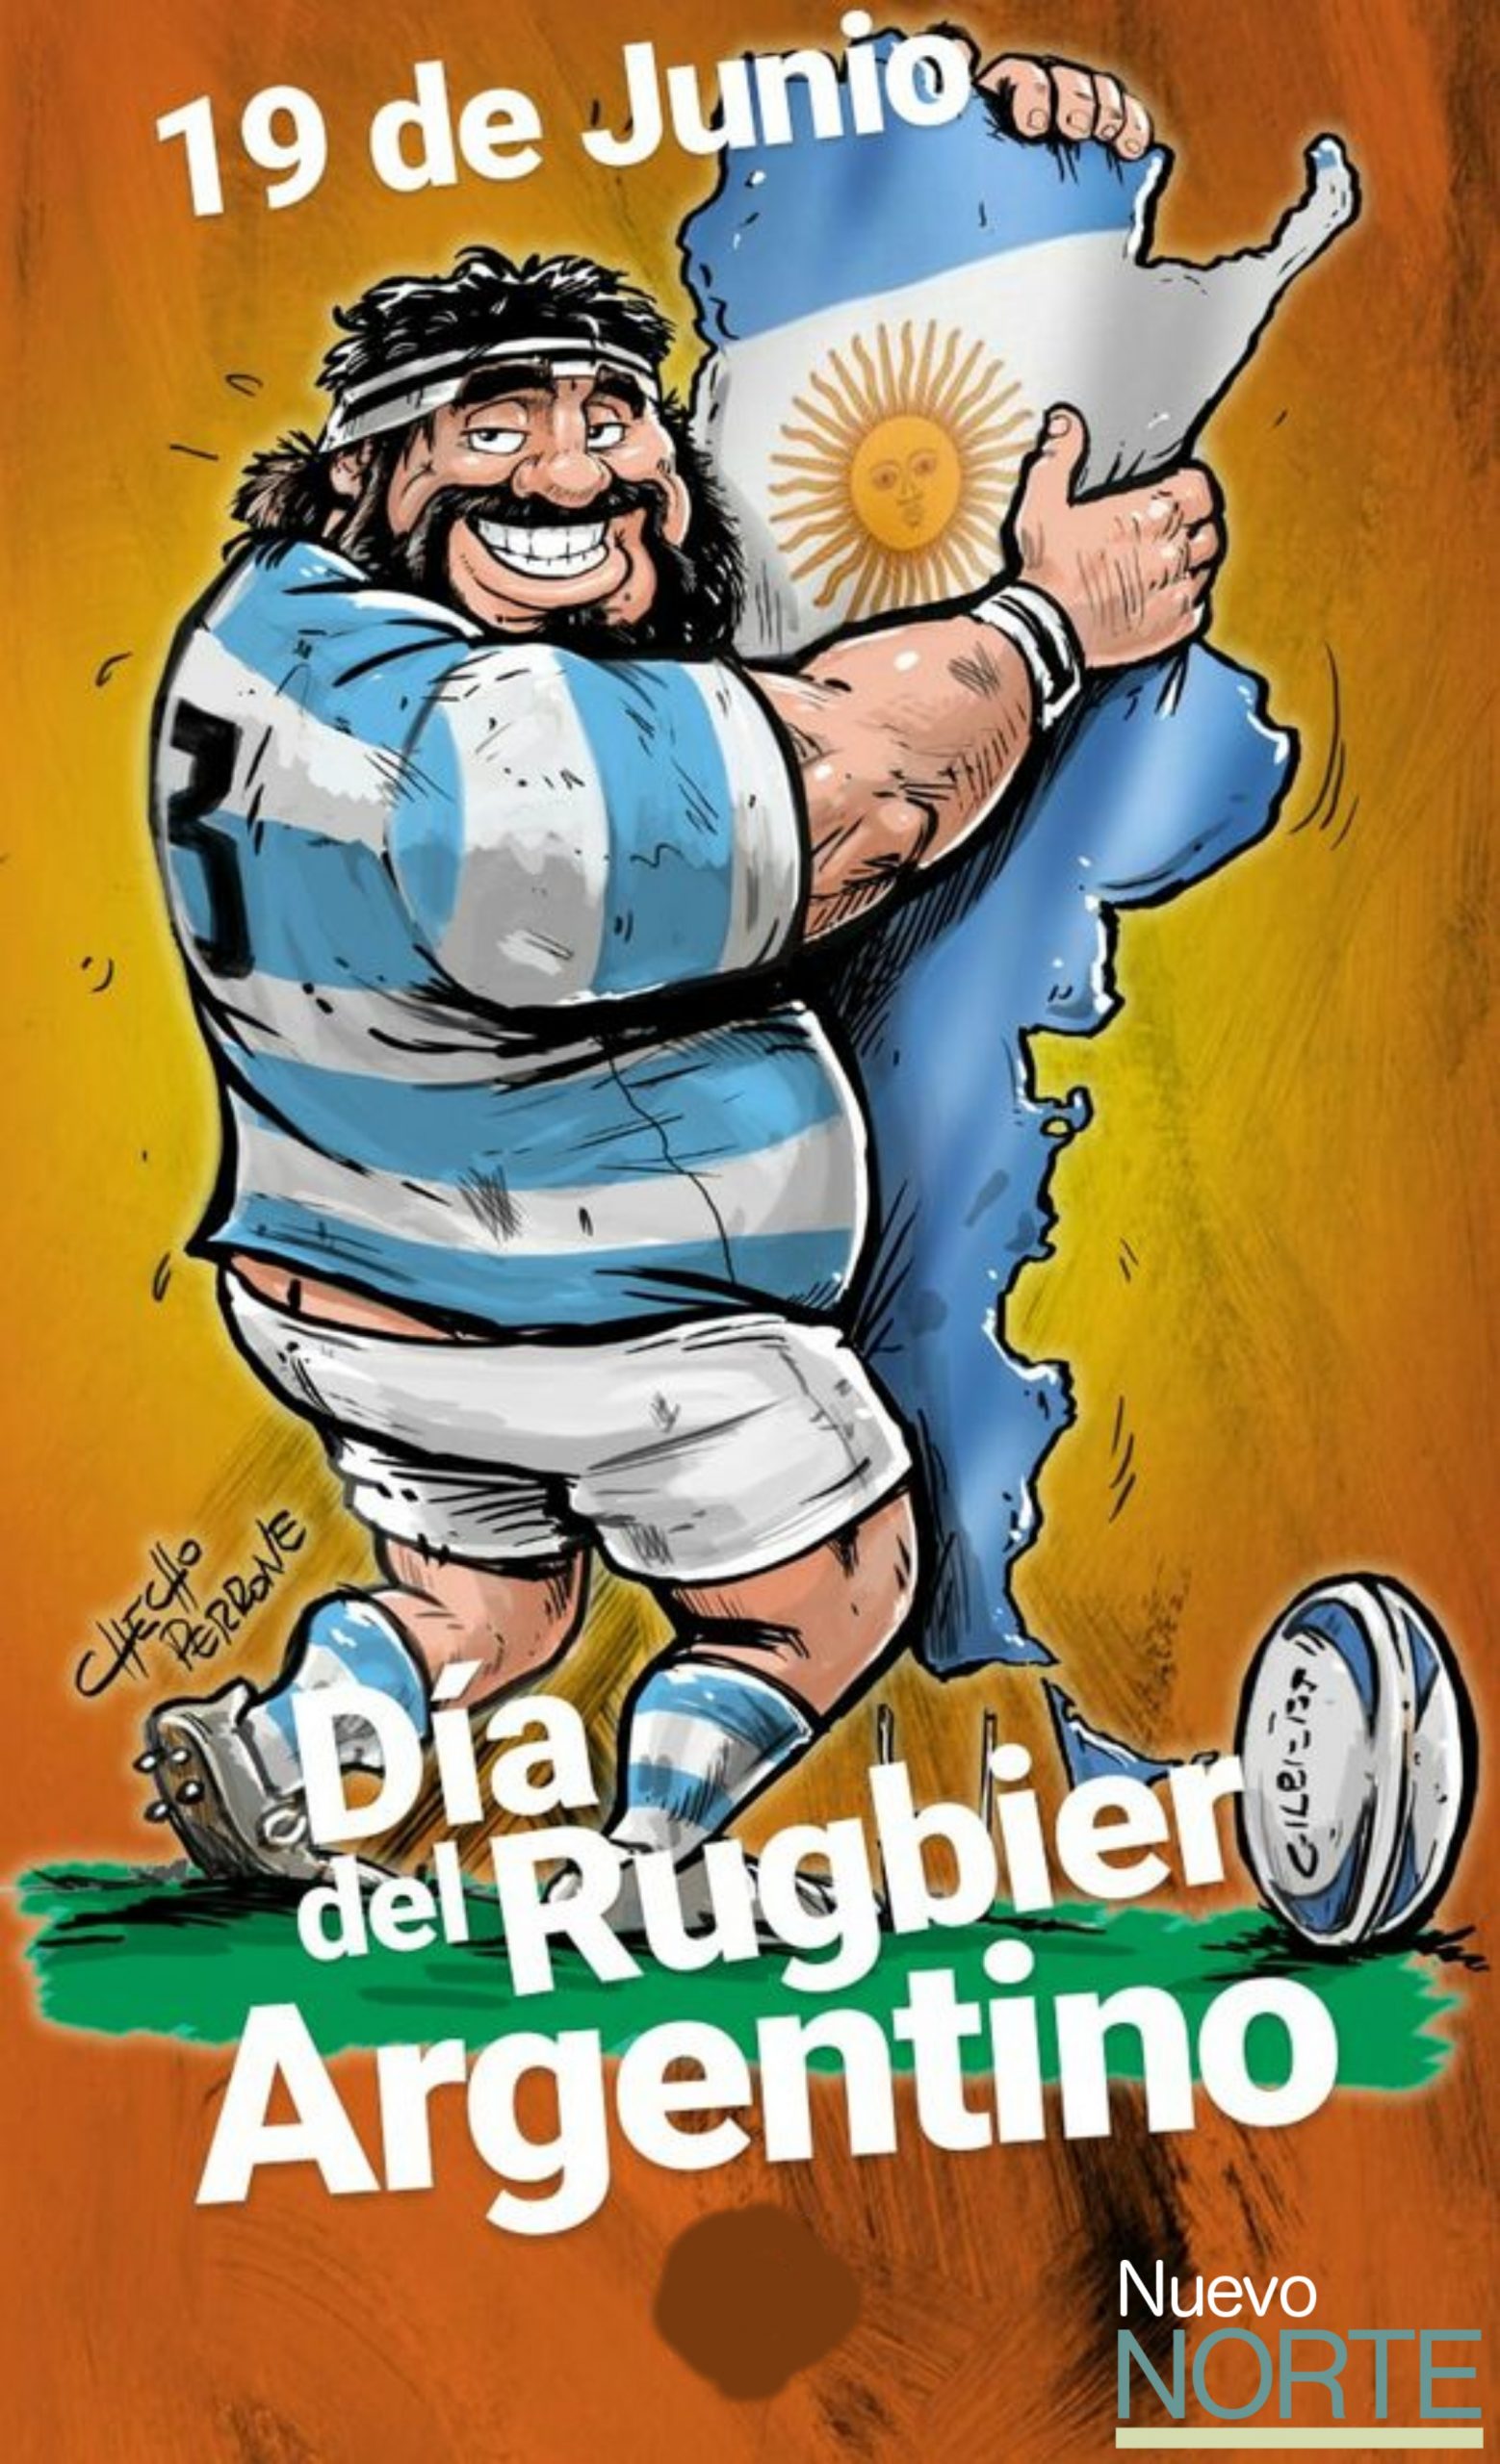 Dia del Rugby